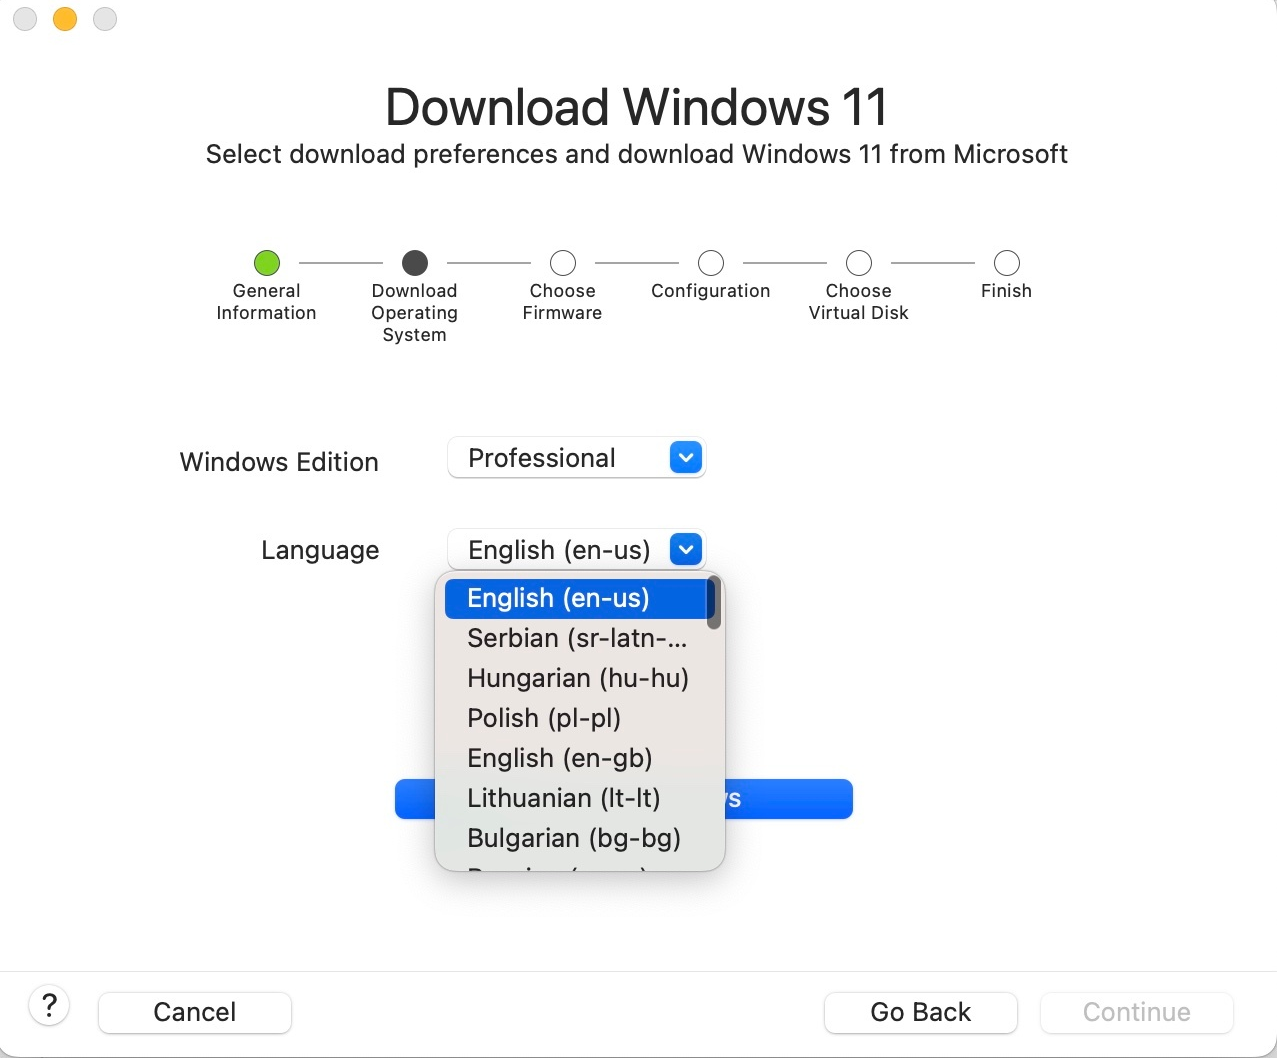 The screenshot shows the field to select the preferred Windows 11 language.